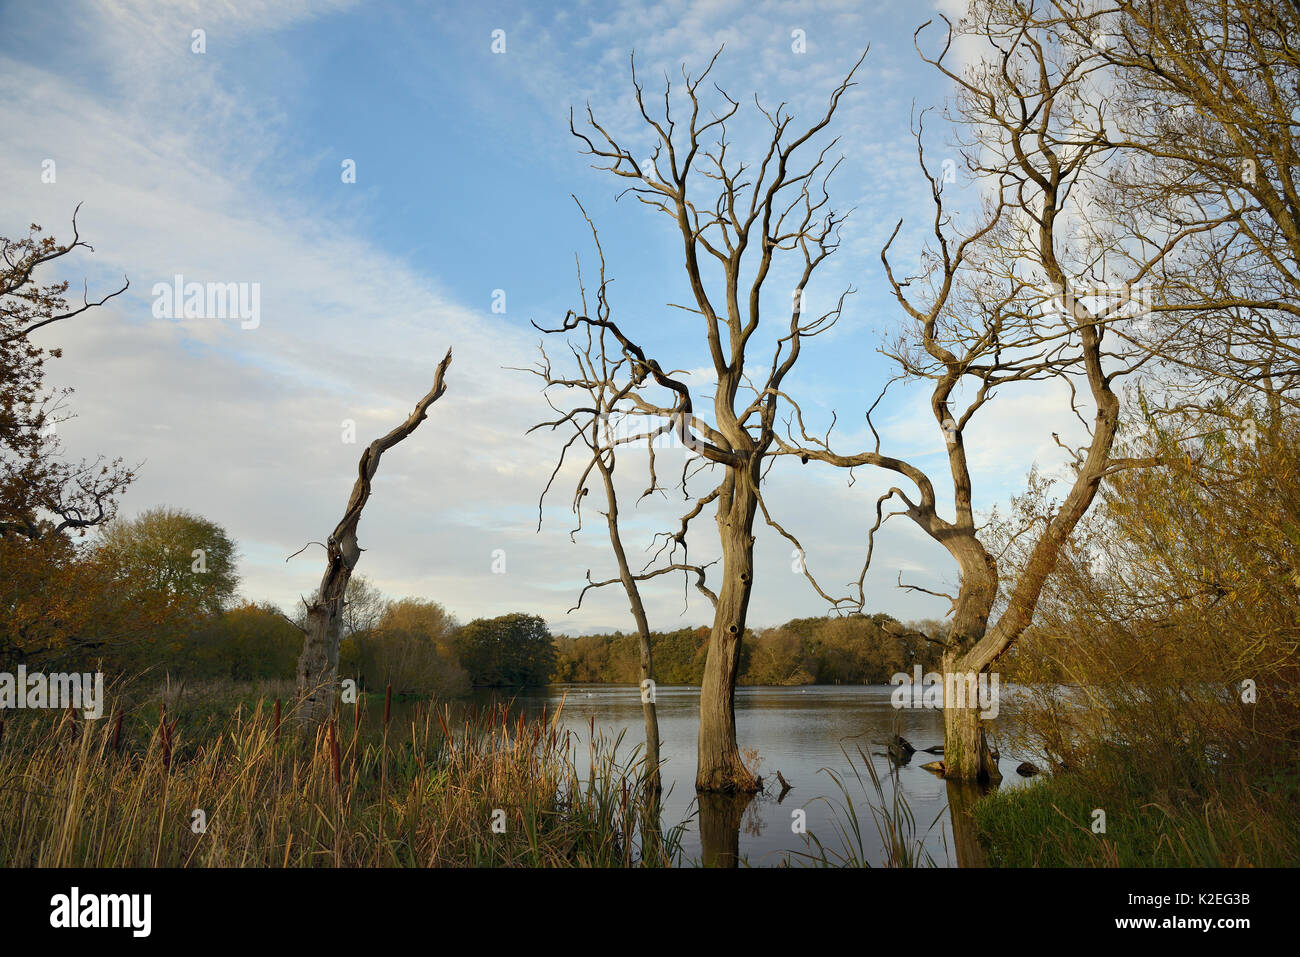 Dead Willow trees (Salix sp.), drowned by flooding, Coate water reservoir, Swindon, UK, November. Stock Photo